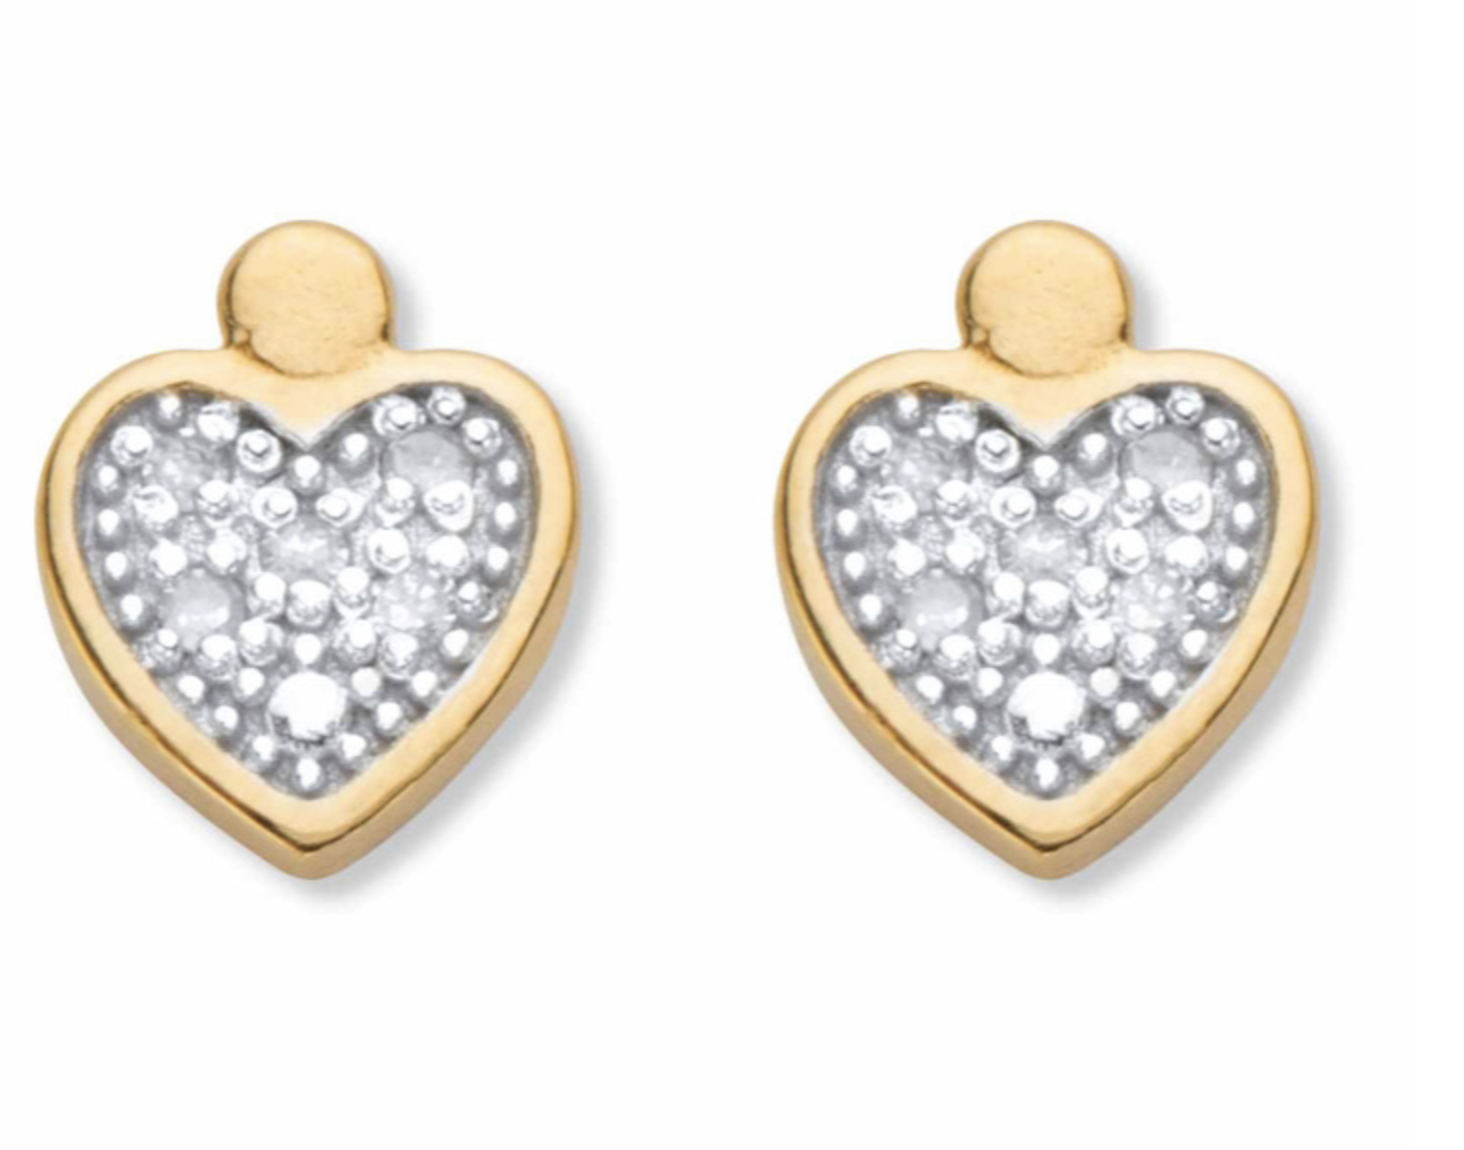 ROUND DIAMOND ACCENT HEART SHAPED STUDS EARRINGS 18K GOLD STERLING SILVER - $99.99